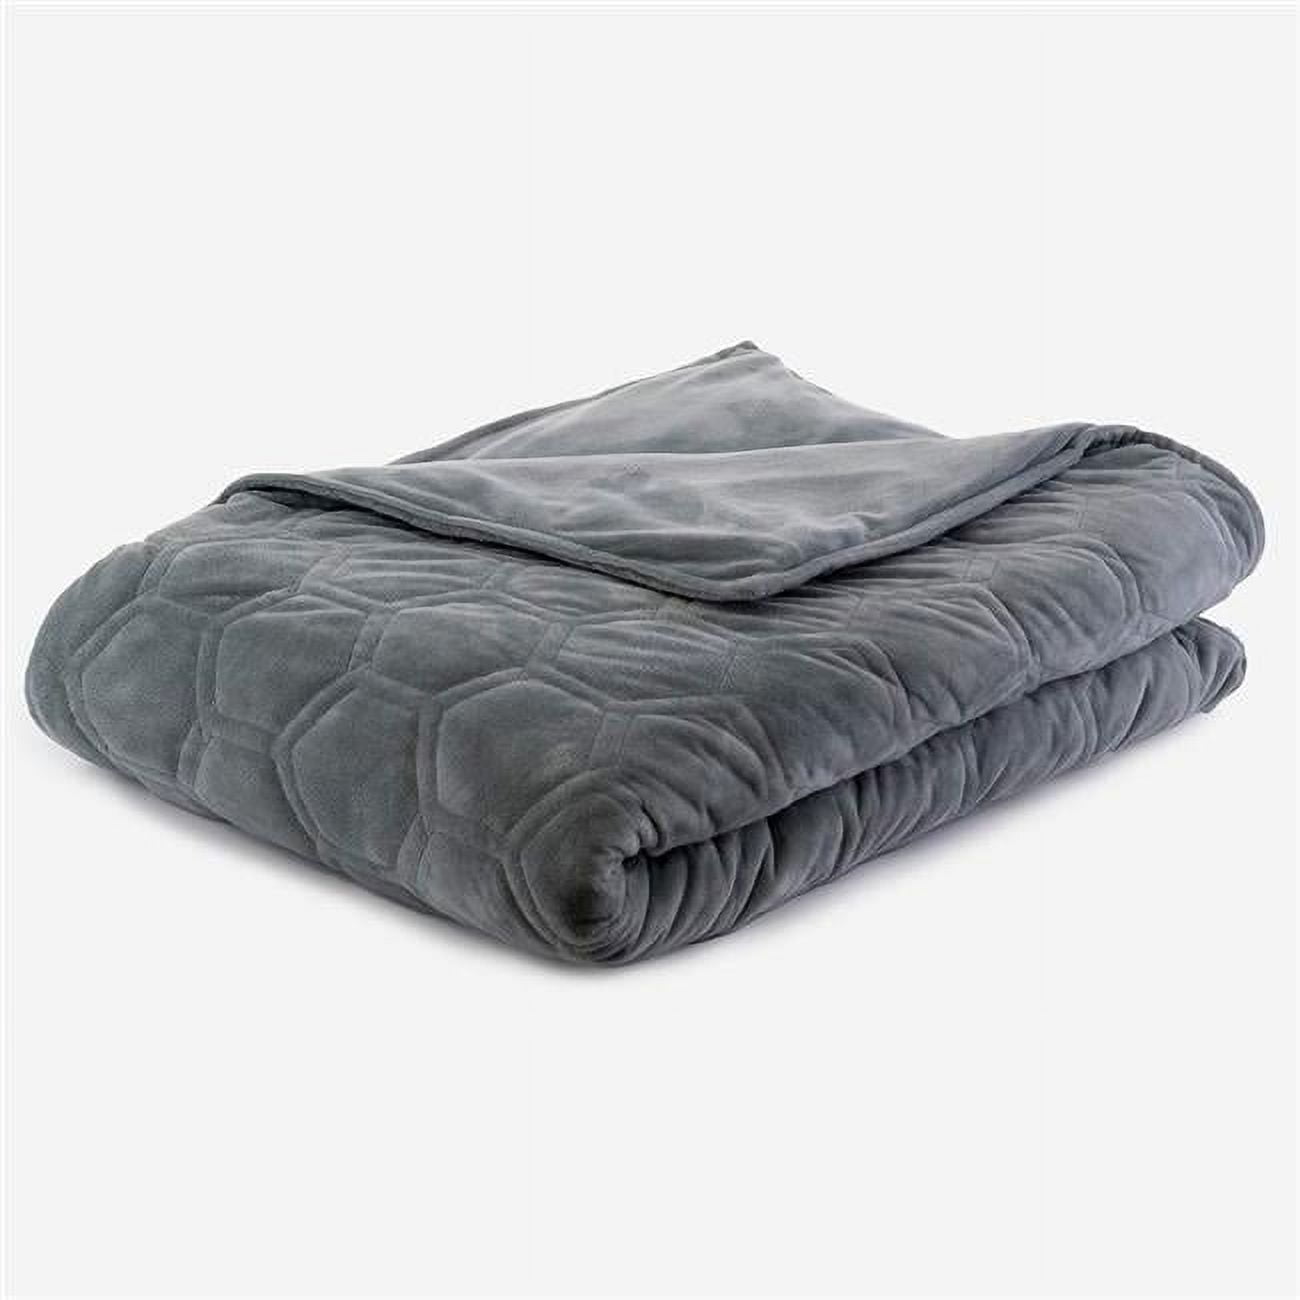 Dc4872-hc-ws 48 X 72 In. Honeycomb Minky Super Soft Quilted Duvet Cover - Gray